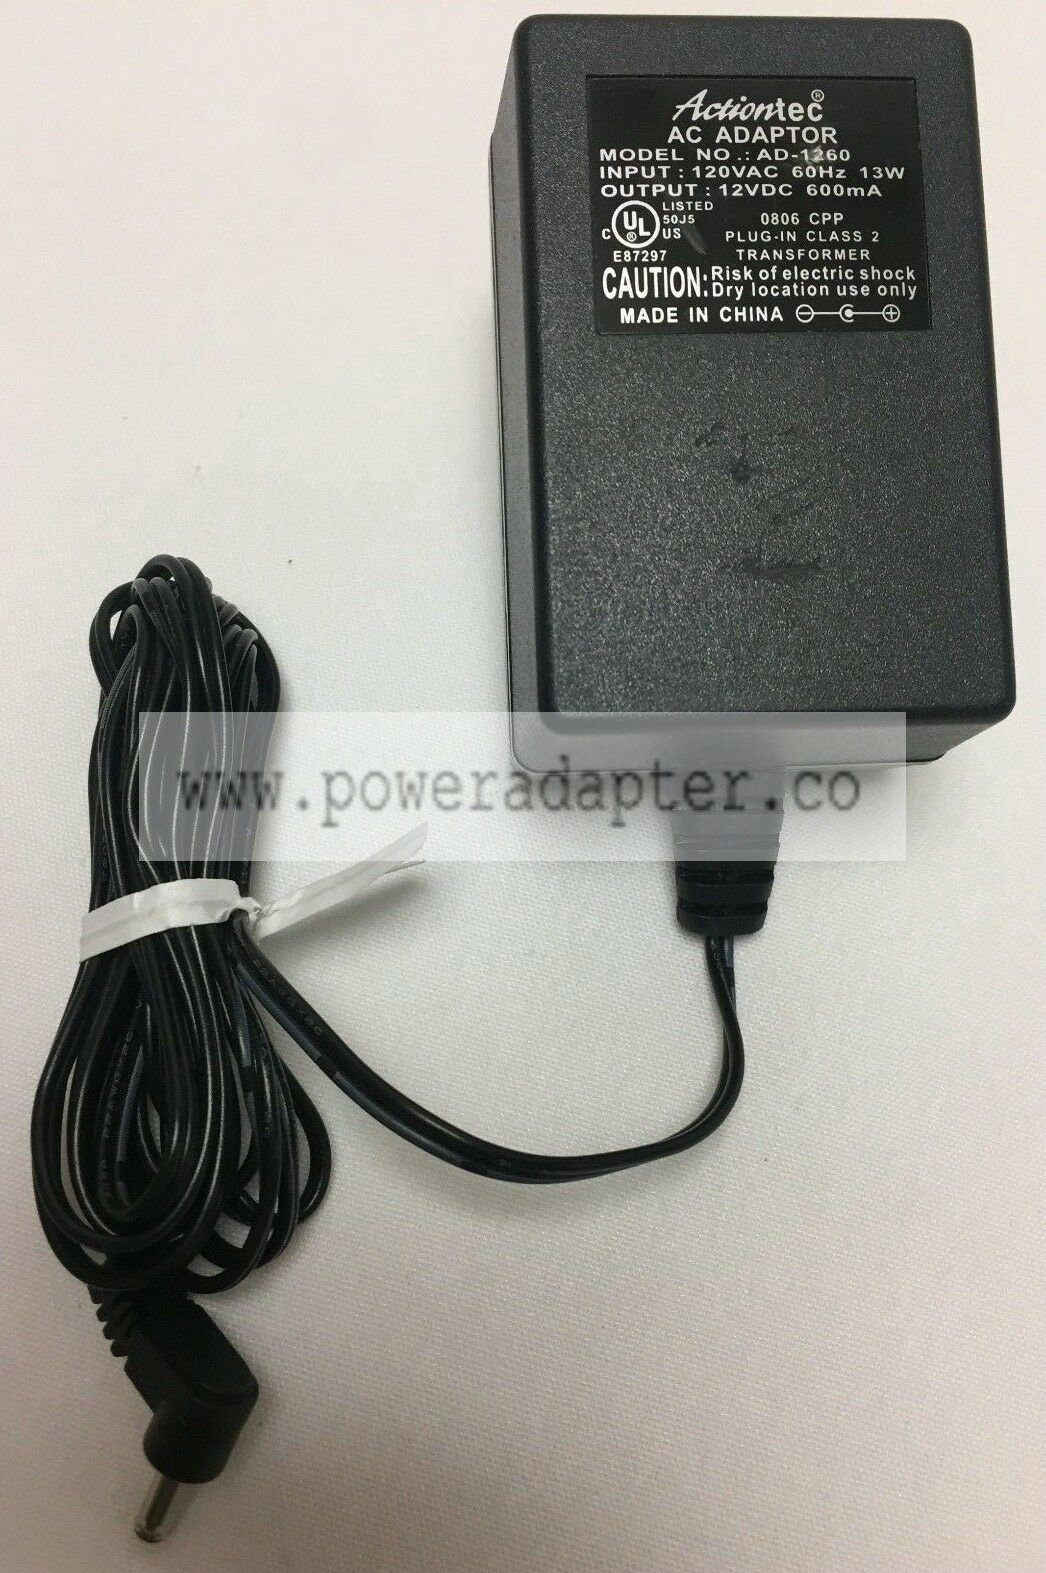 Actiontec AC Adapter Model NO: AD-1260 Plug-In Class 2 Transformer Output Voltage(s): 12V, 12VDC 600mA Type: AC/Stan - Click Image to Close